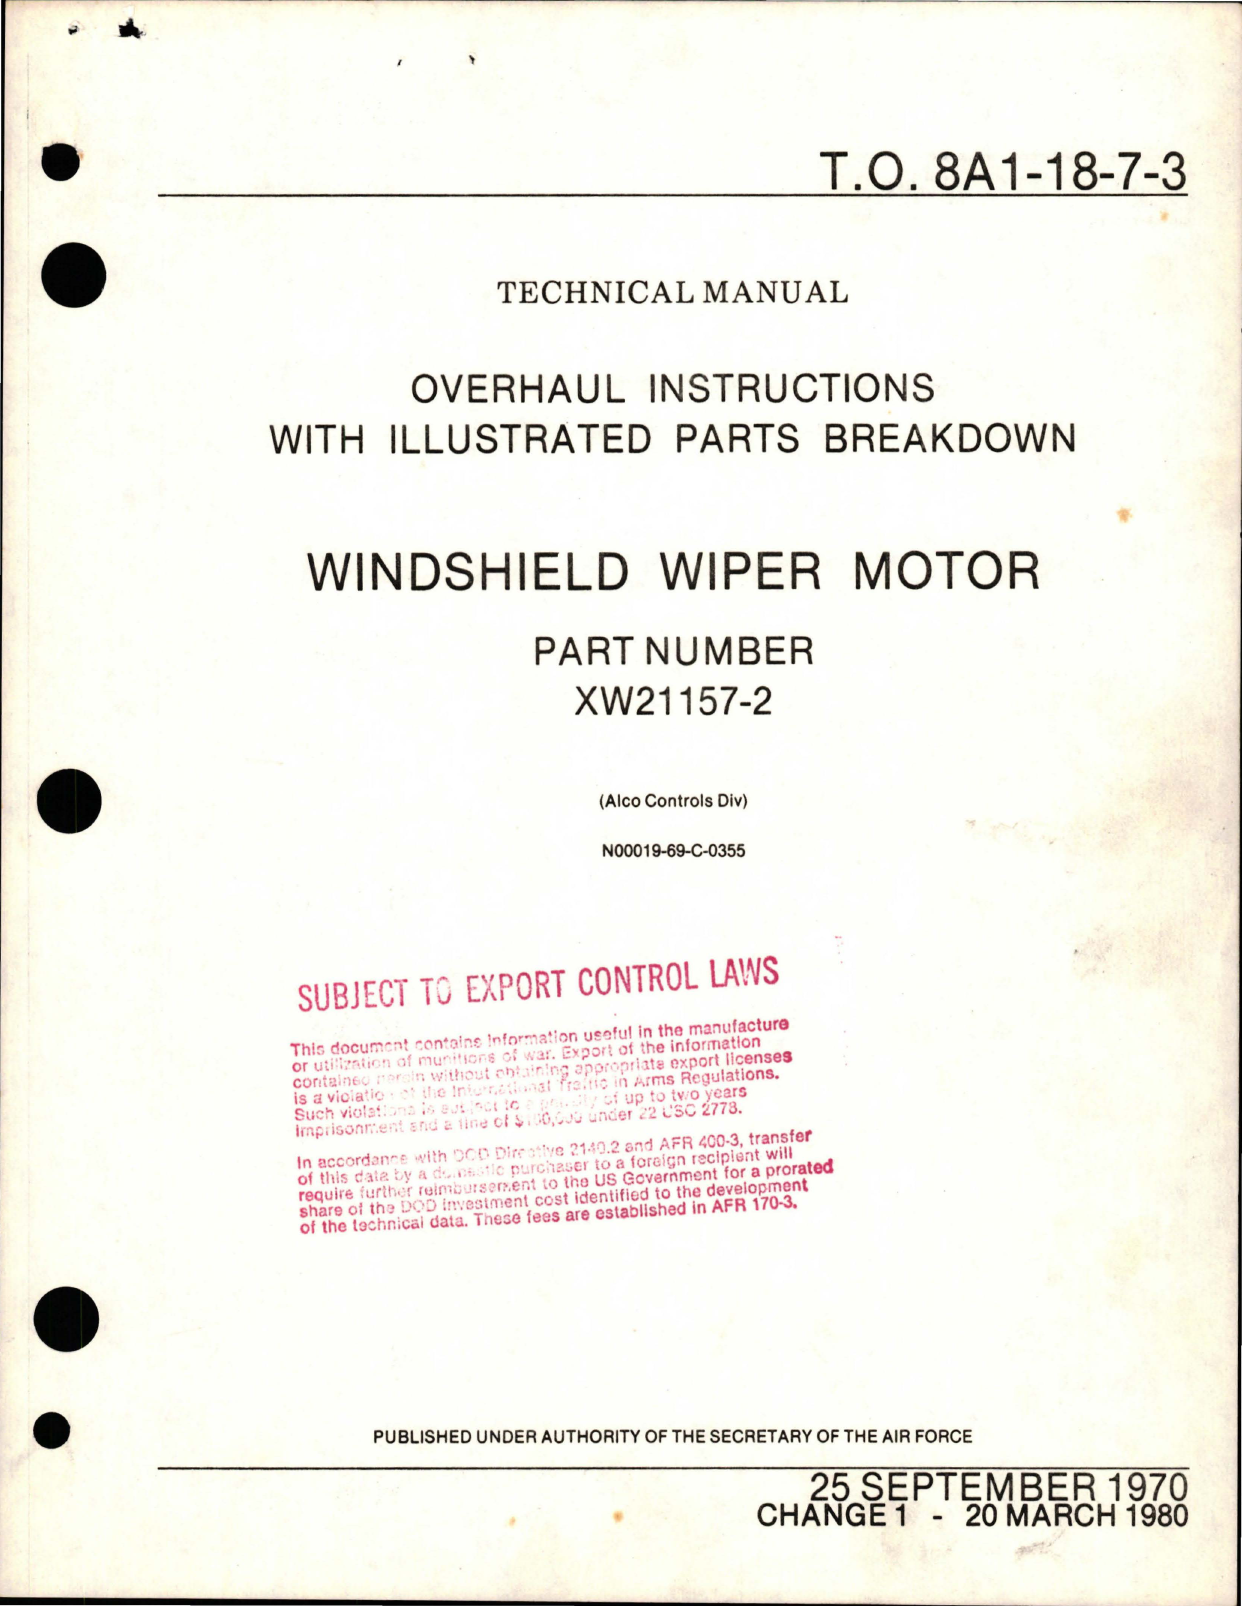 Sample page 1 from AirCorps Library document: Overhaul Instructions with Illustrated Parts Breakdown for Windshield Wiper Motor - Part XW21157-2 